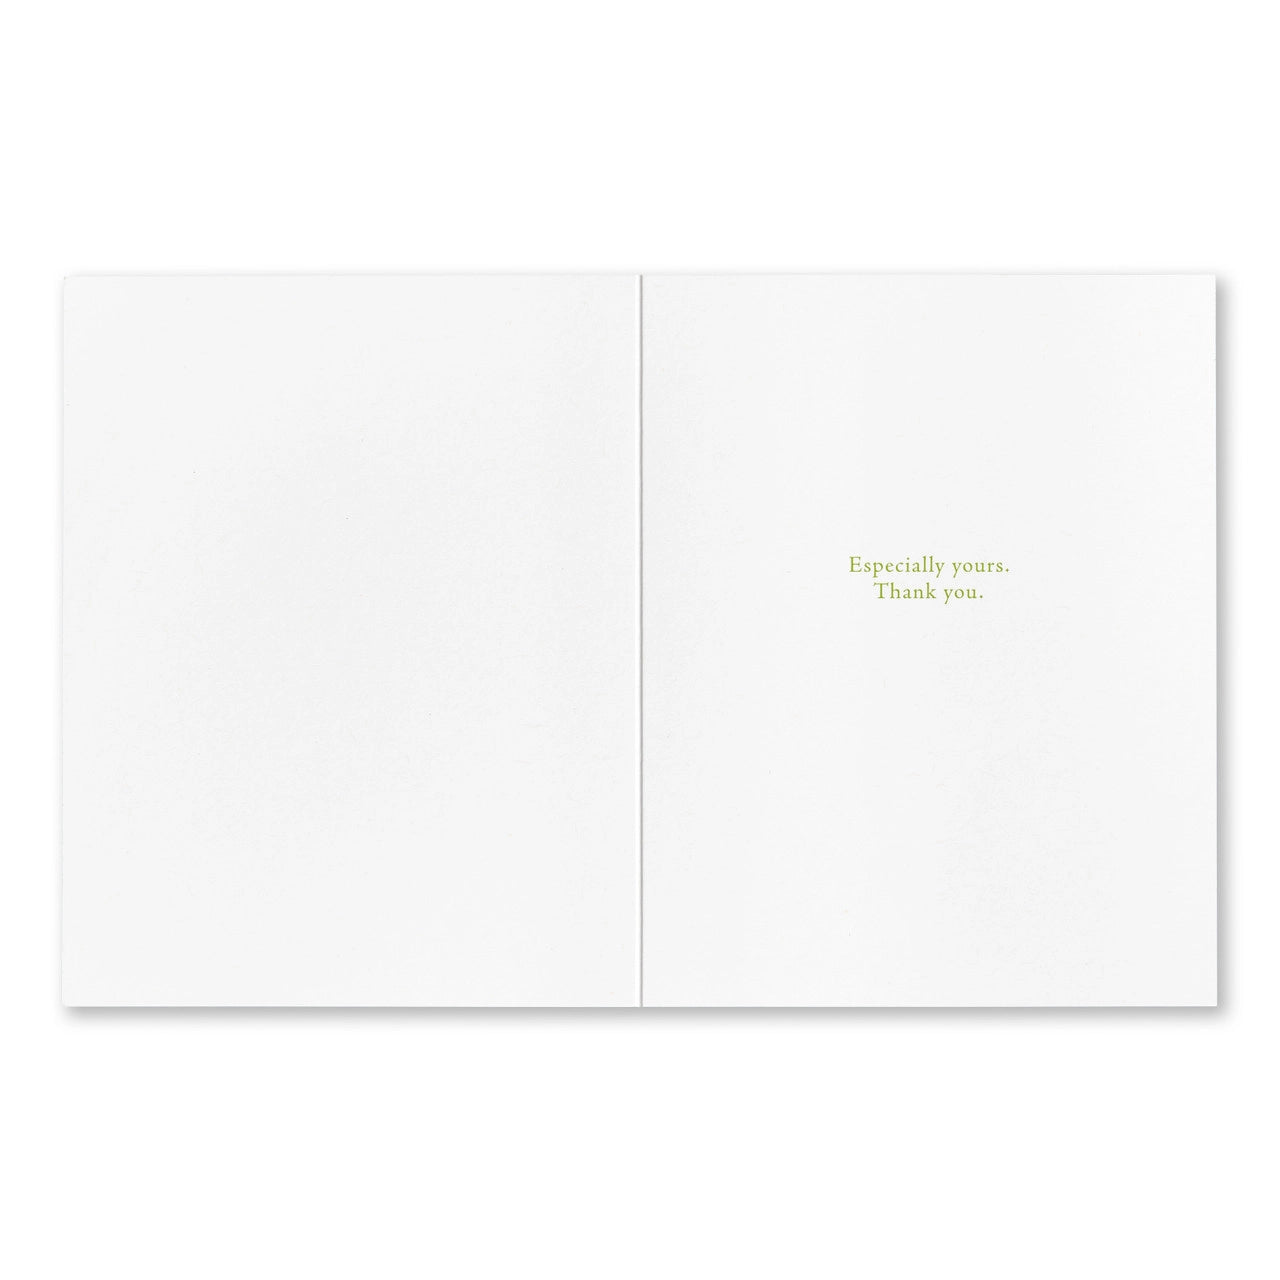 Kindness...Is Always Welcome. -Amelia Barr - Thank You Greeting Card - Mellow Monkey